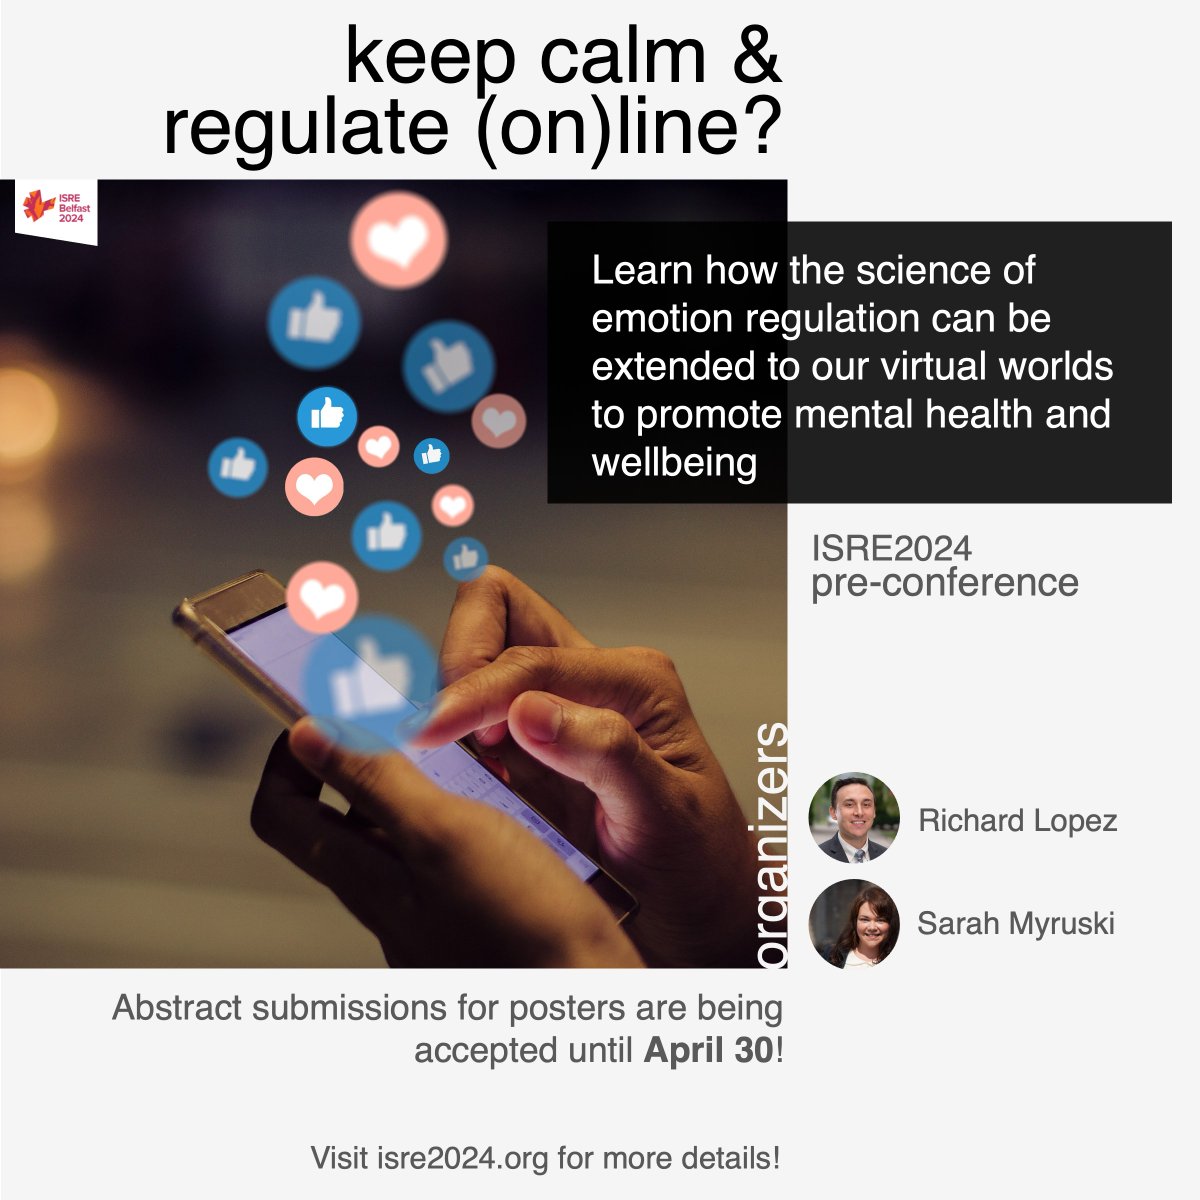 👍 Let's examine psychological risk factors linked to #socialmedia use and explore how #emotionregulation can counteract them, focusing on #youth & young adults. Join us at this #ISRE2024 pre-conference to discuss and discover more! ℹ️ isre2024.org/preconference/…